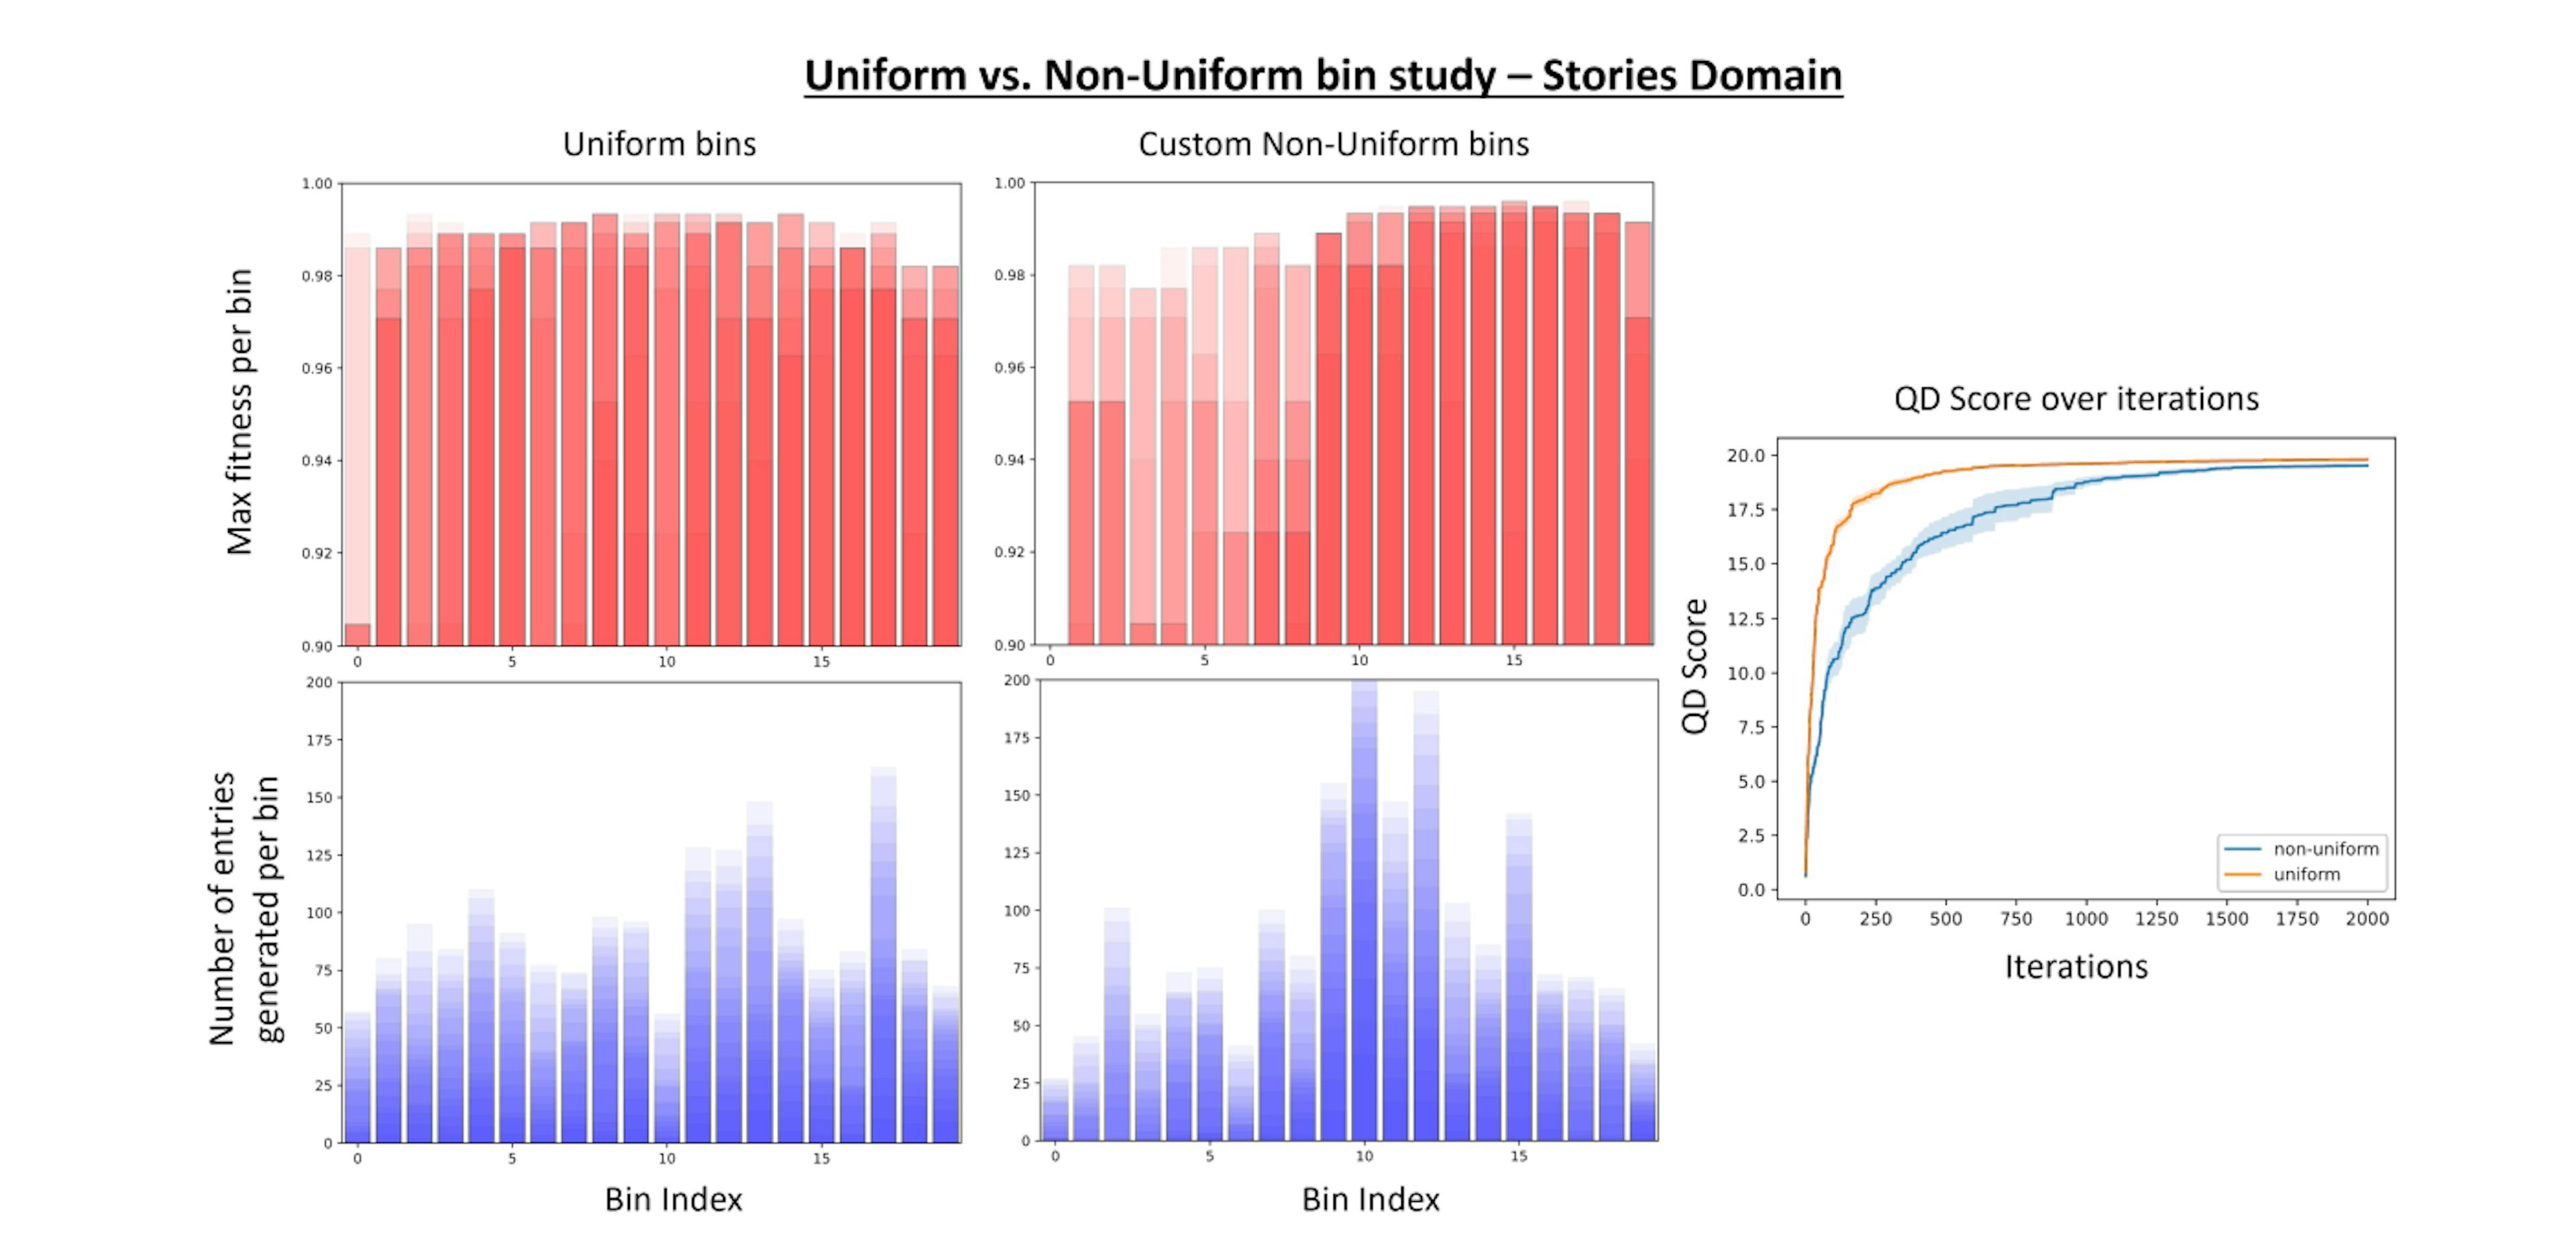 Figure 40: Uniform vs. custom non-uniform bins for Stories domain. (Top) Maximum fitness achieved per bin over training iterations. Each translucent bar represents data captured every 100 iterations. Uniform bin setting has higher maximum fitness per bin. (Bottom) Number of entries generated per bin over training iterations. Each translucent bar represents data captured every 100 iterations. The uniform bin setting has a more even spread of entries generated across bins. (Right) QD score is achieved by each bin setting over training iterations. Uniform bin setting achieves ahigher QD score than uniform bin setting.